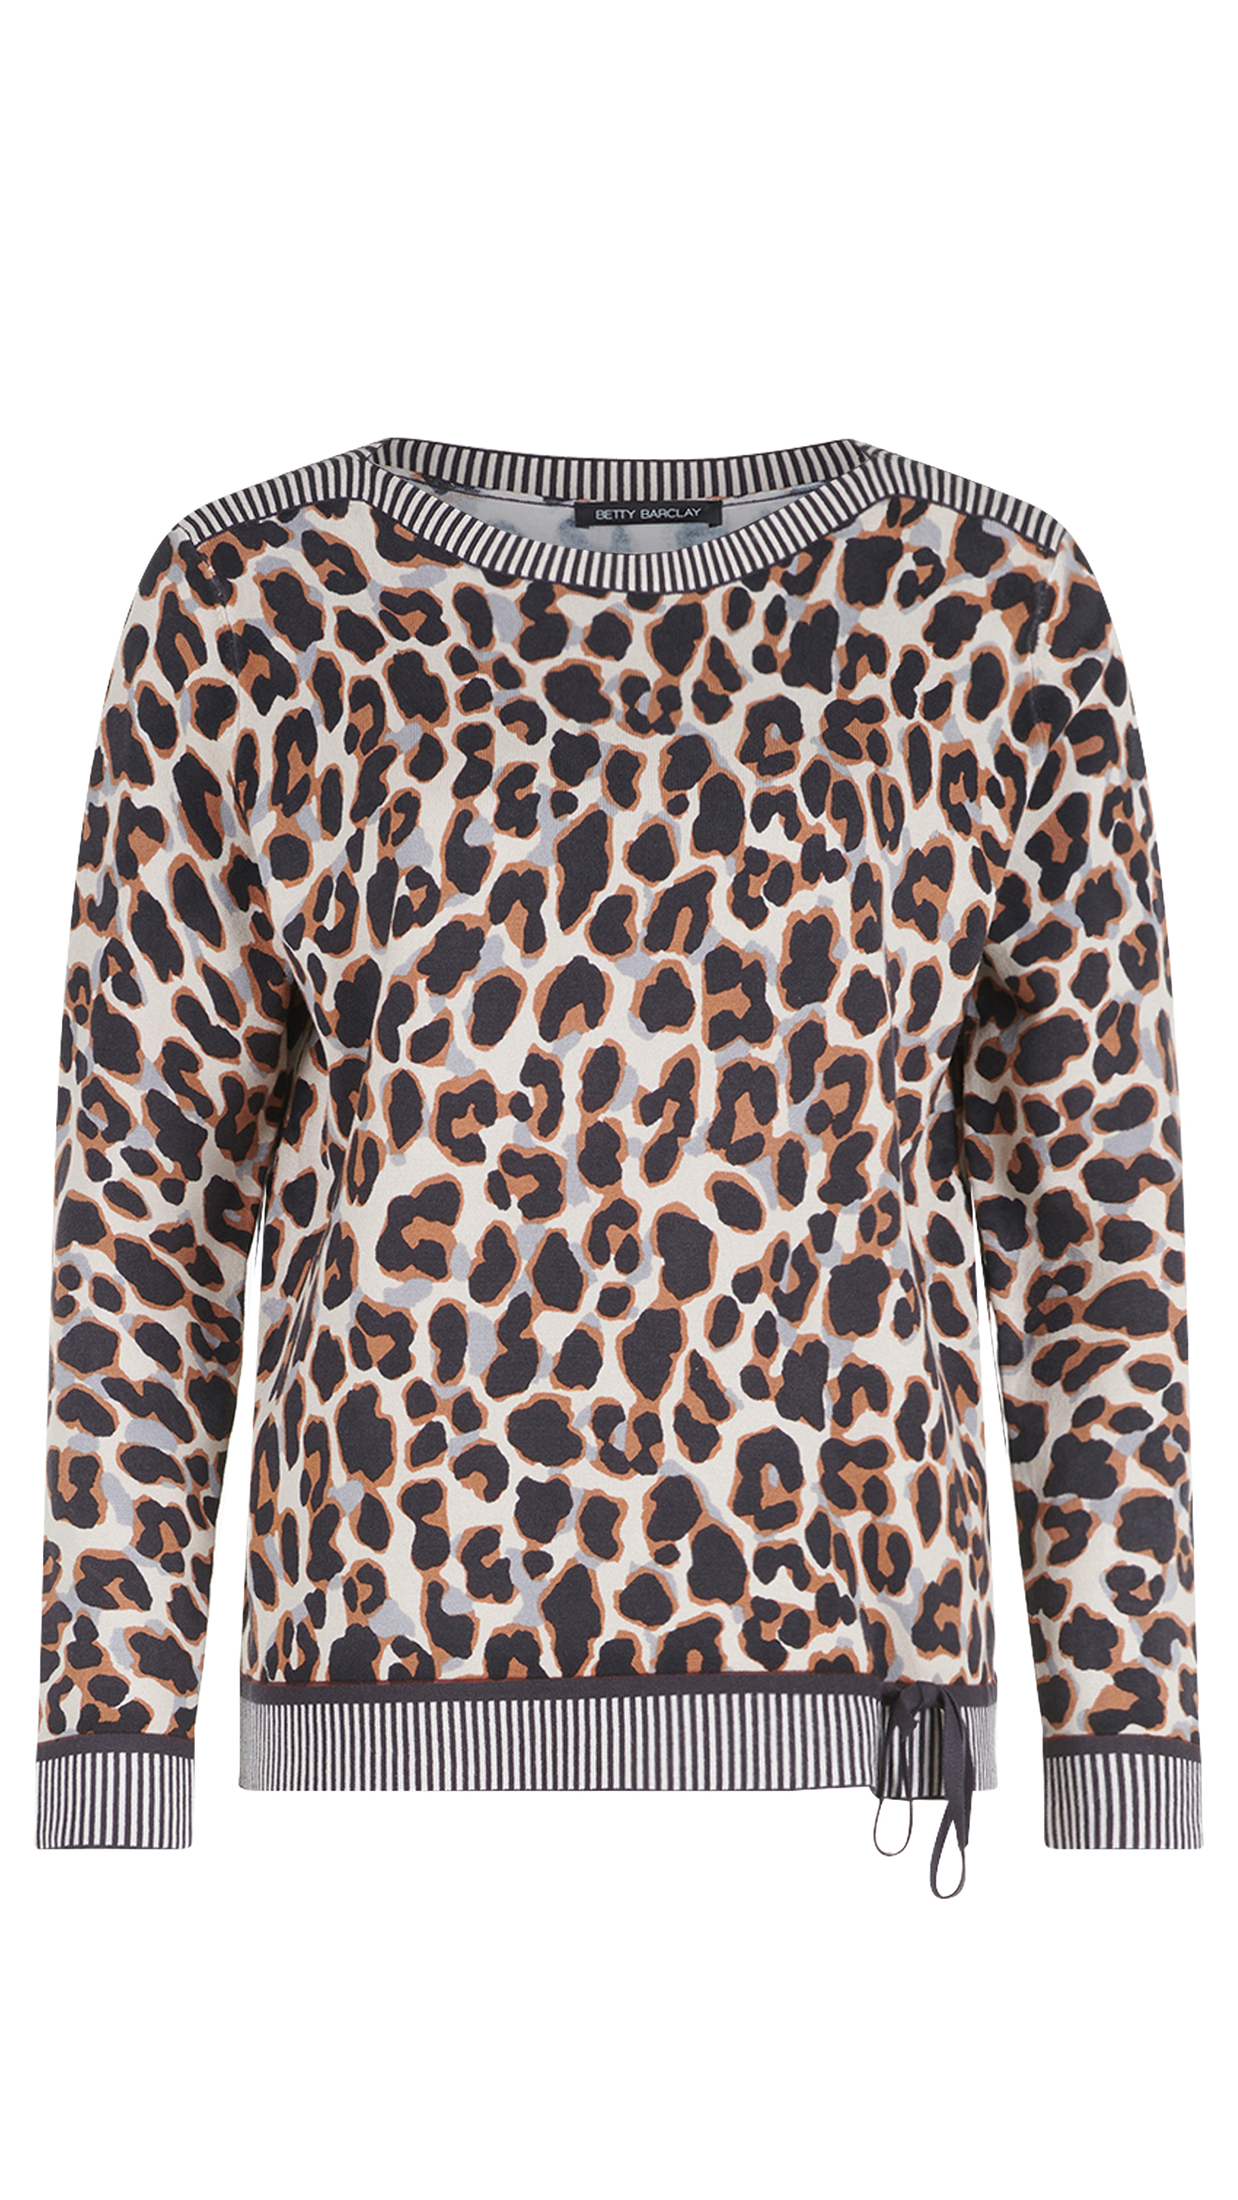 PULL LEOPARD BETTY BARCLAY 5129 2825 CAMEL GRIS